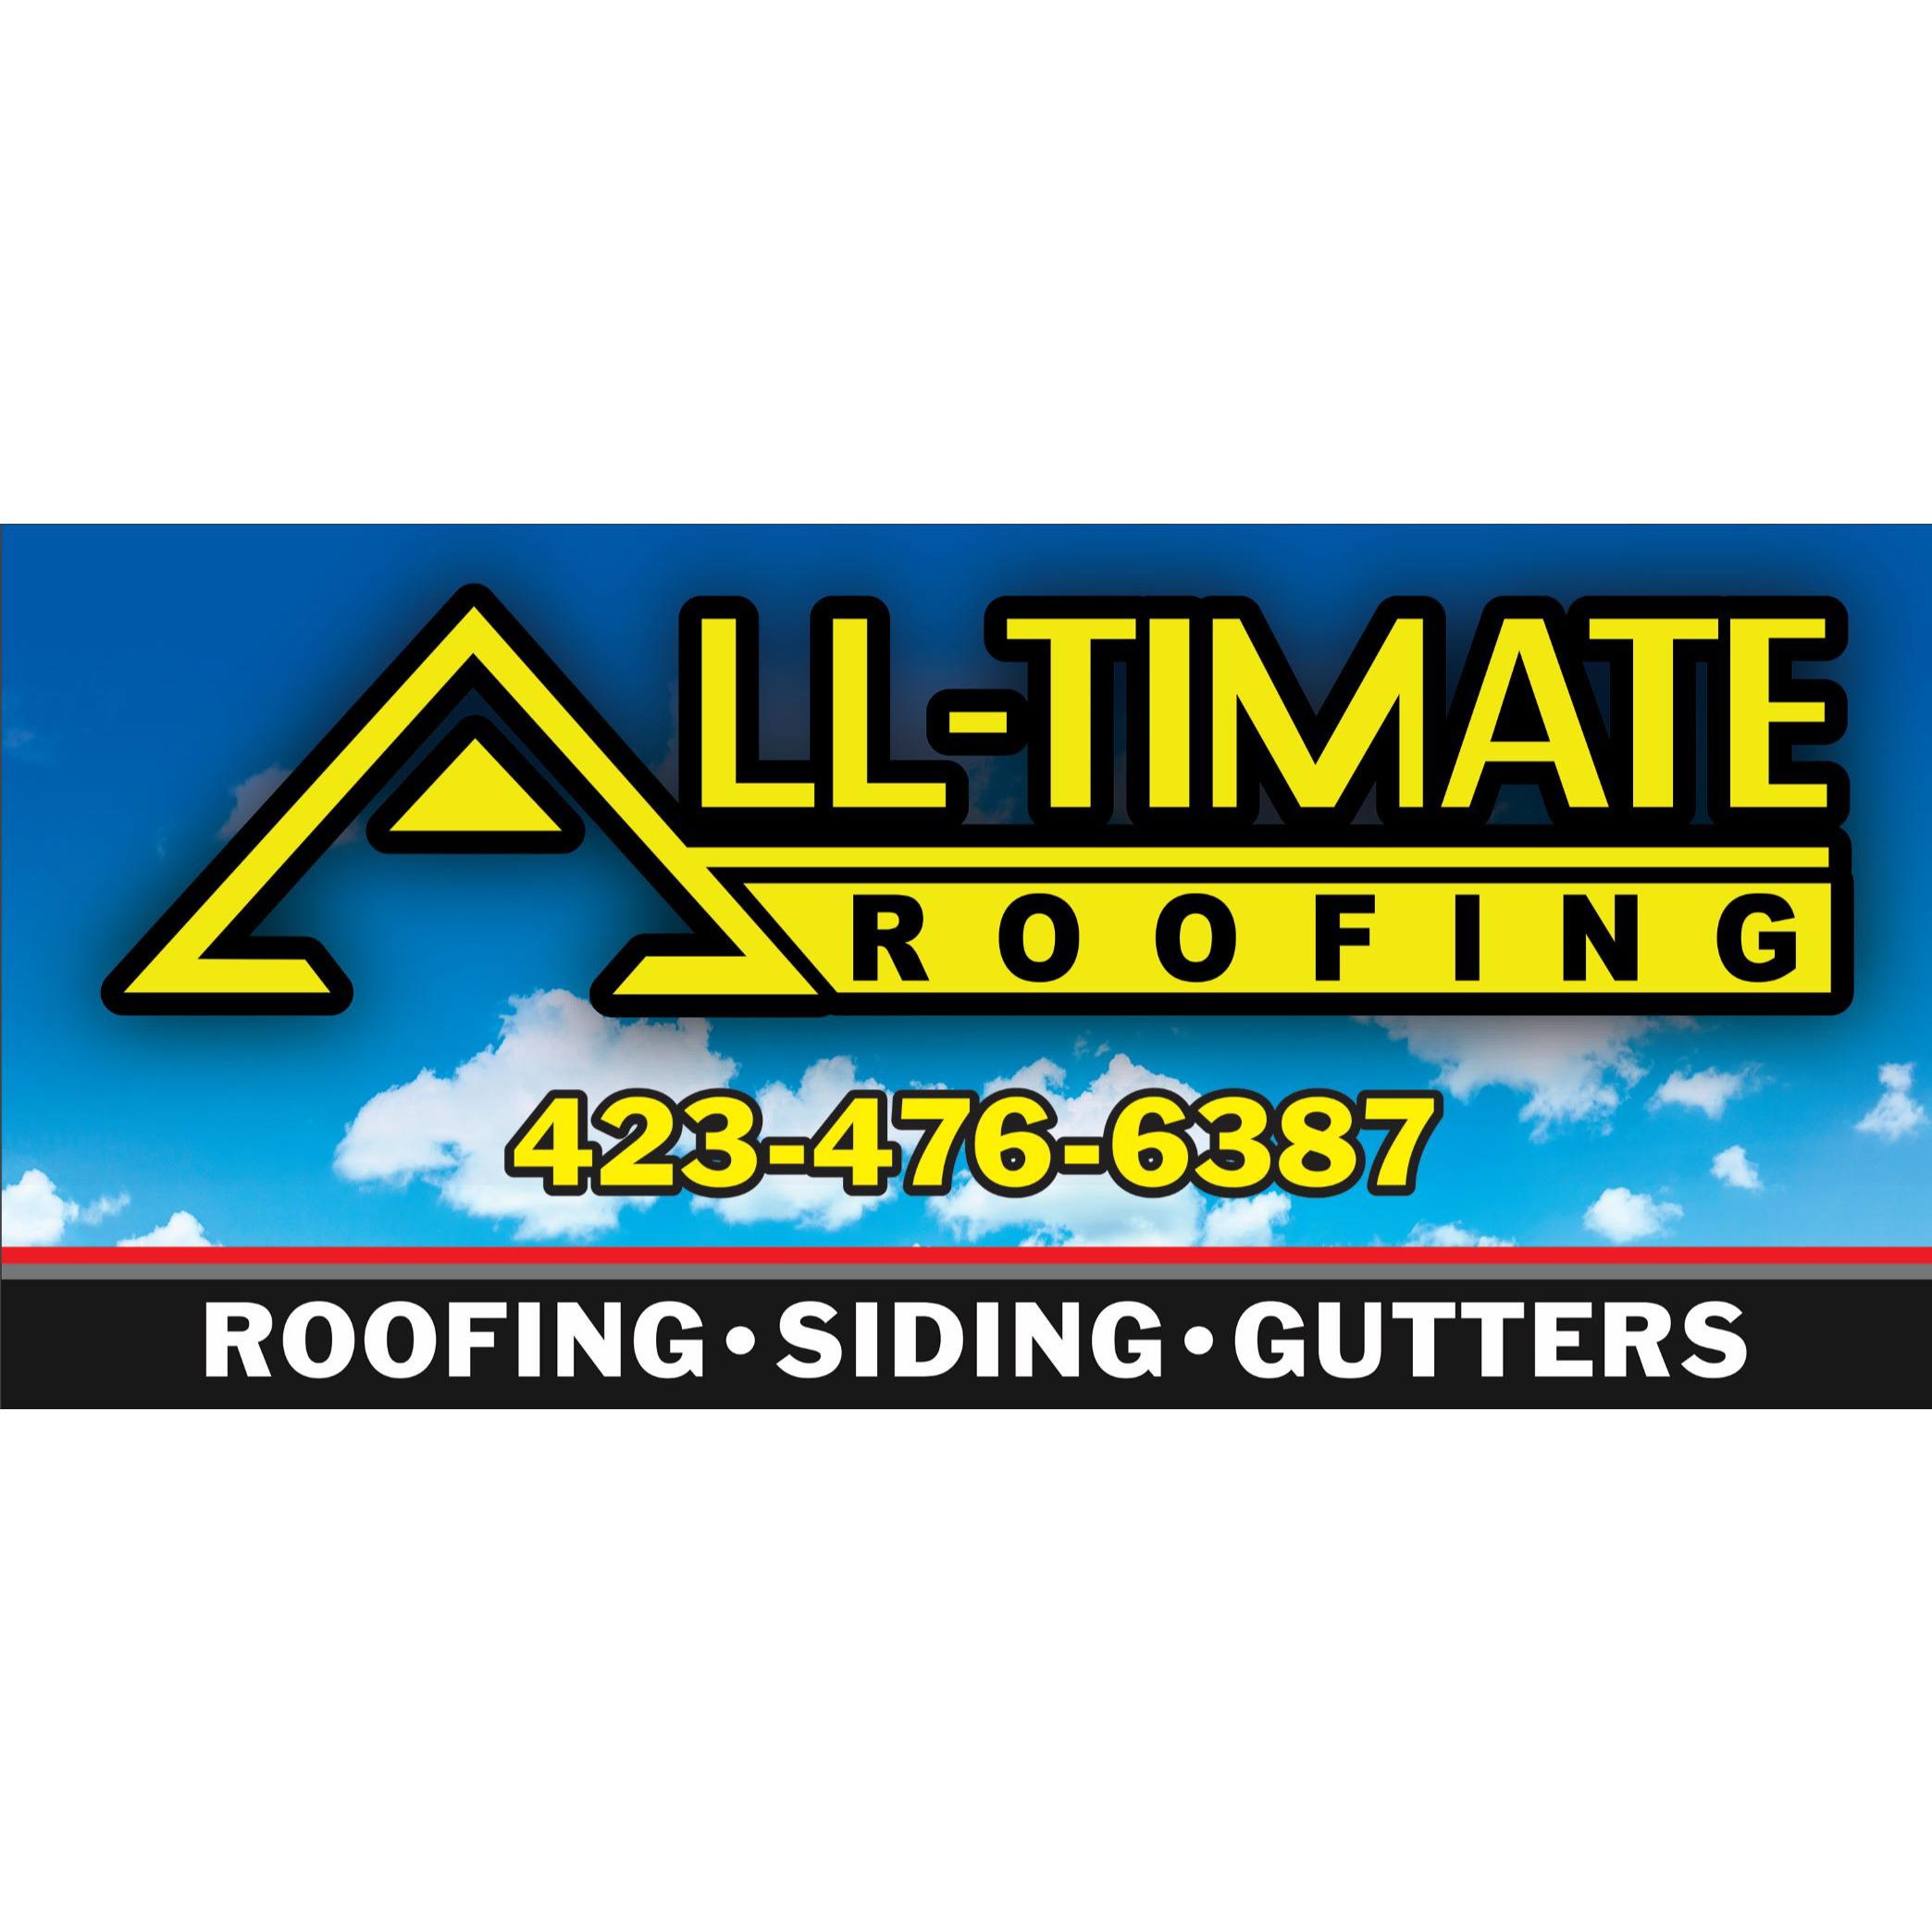 All-timate Roofing - Cleveland, TN 37312 - (423)476-6387 | ShowMeLocal.com